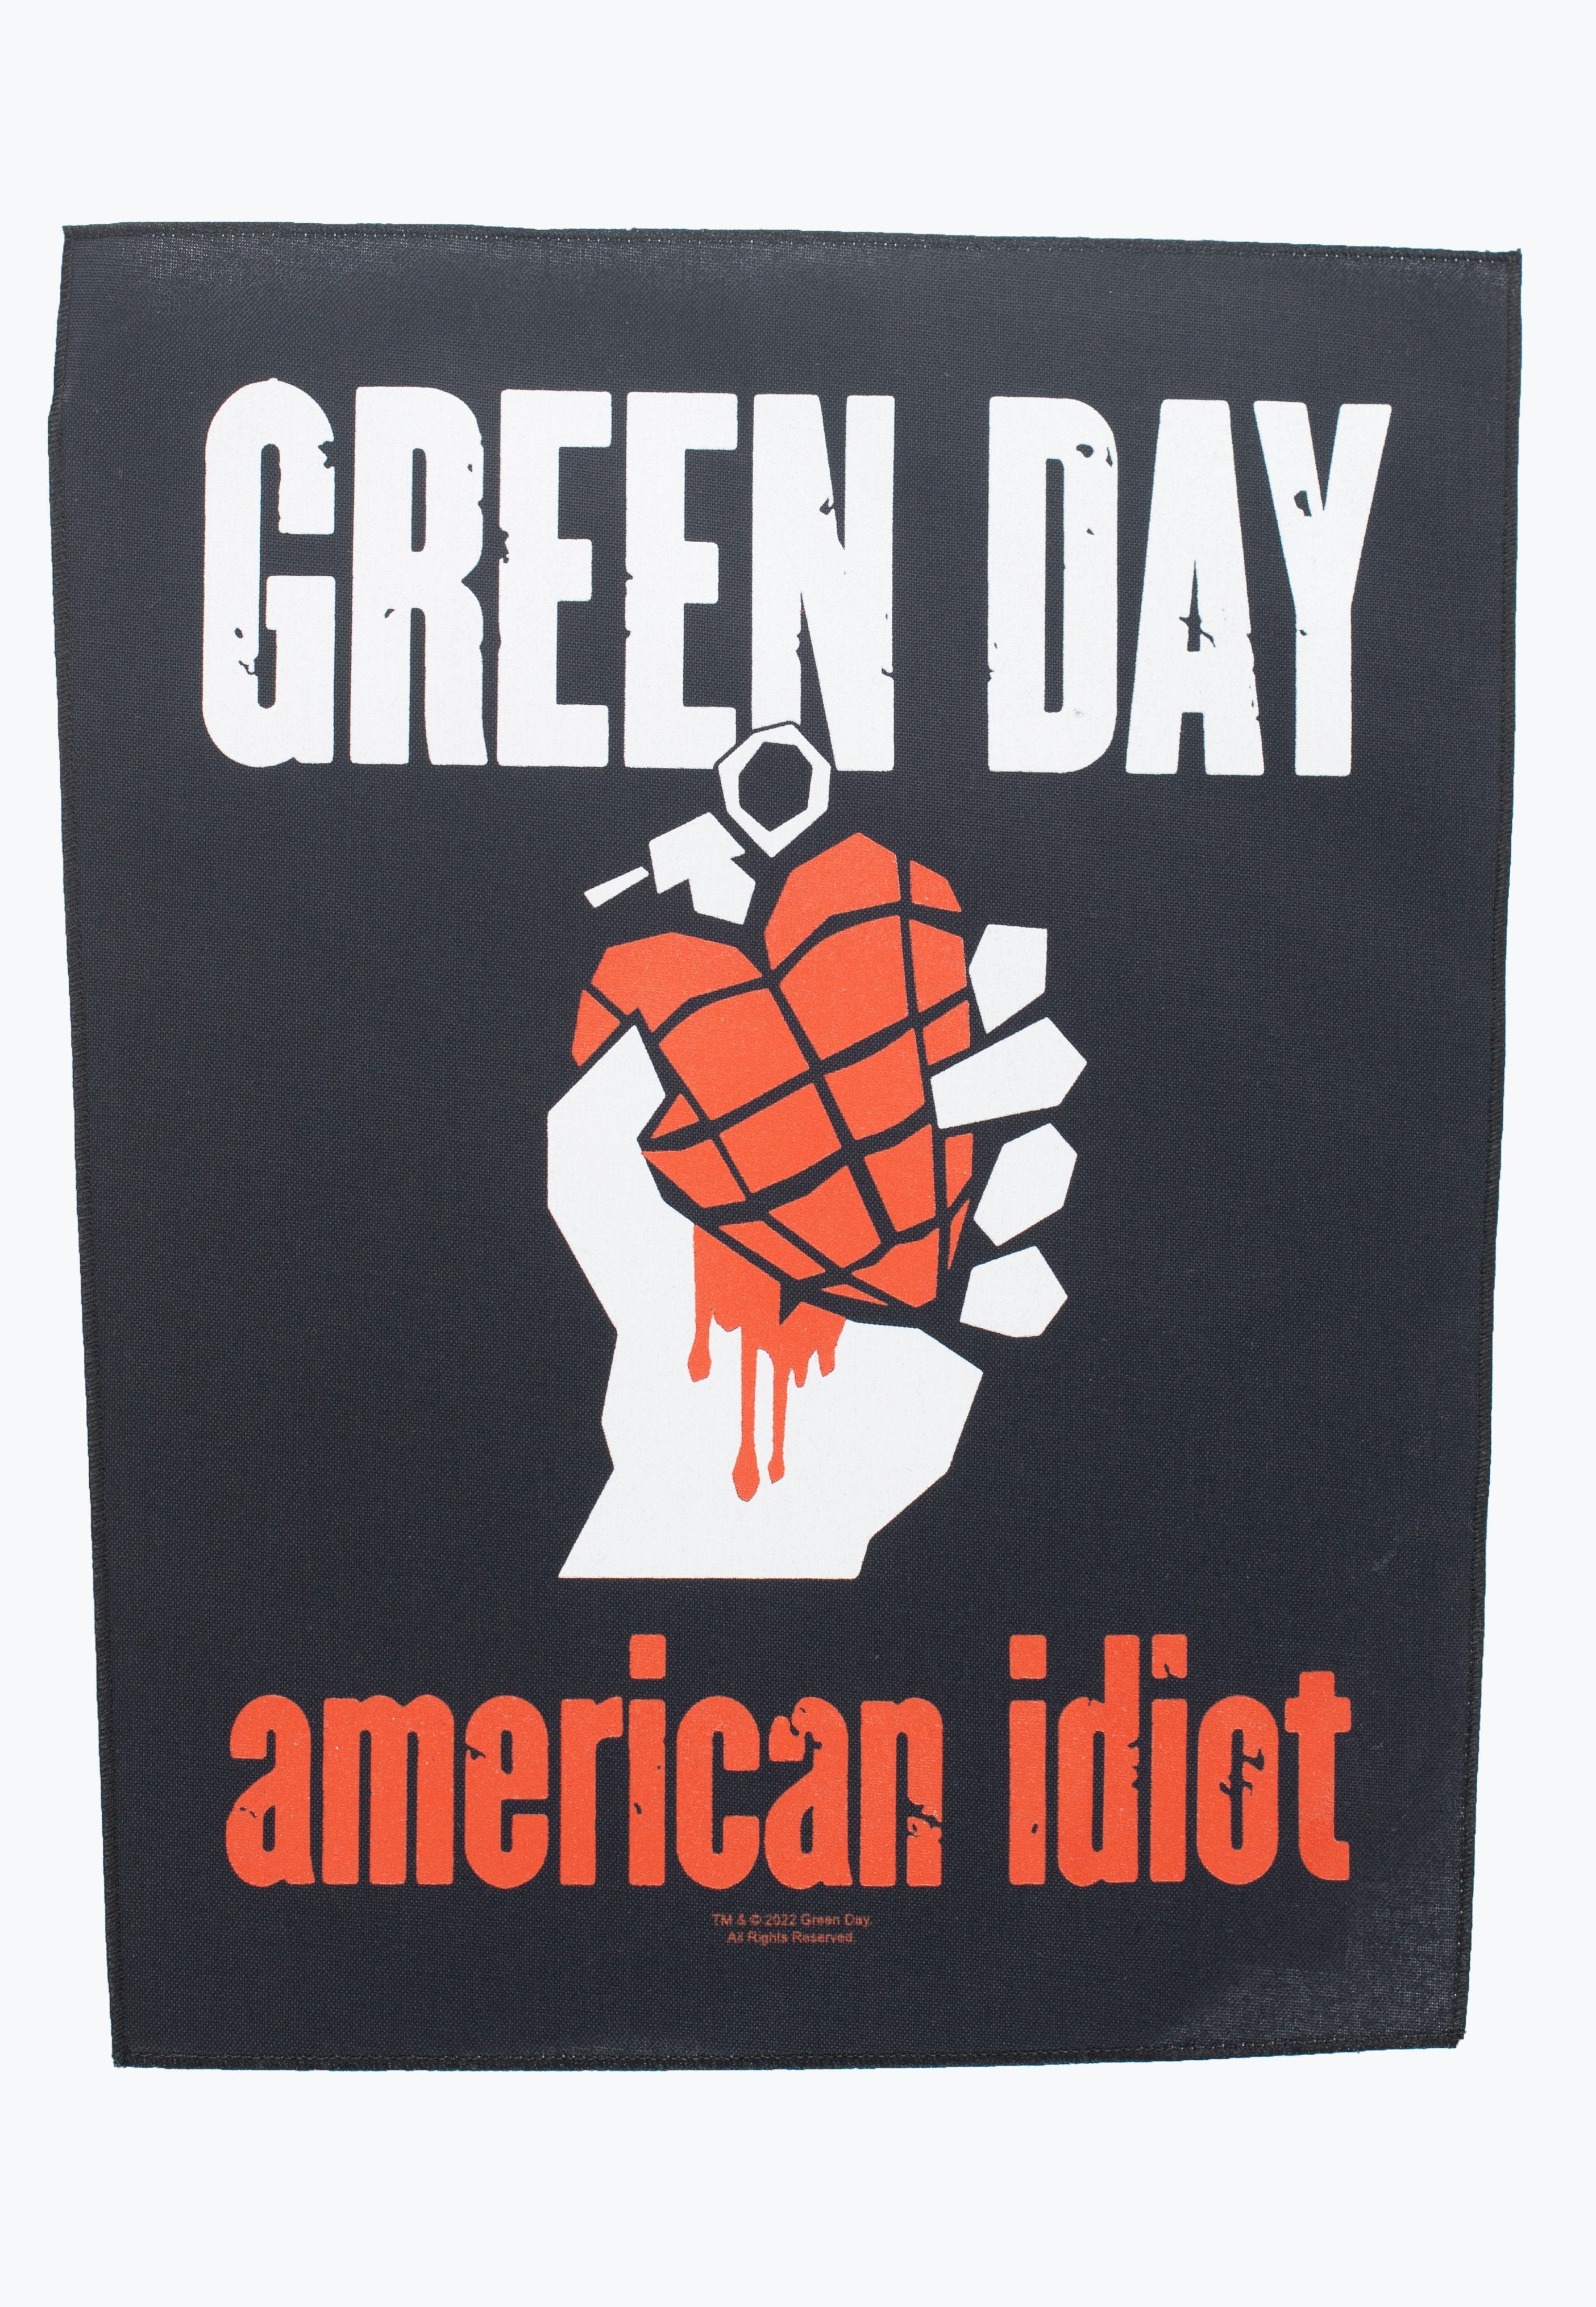 Green Day - American Idiot - Backpatch